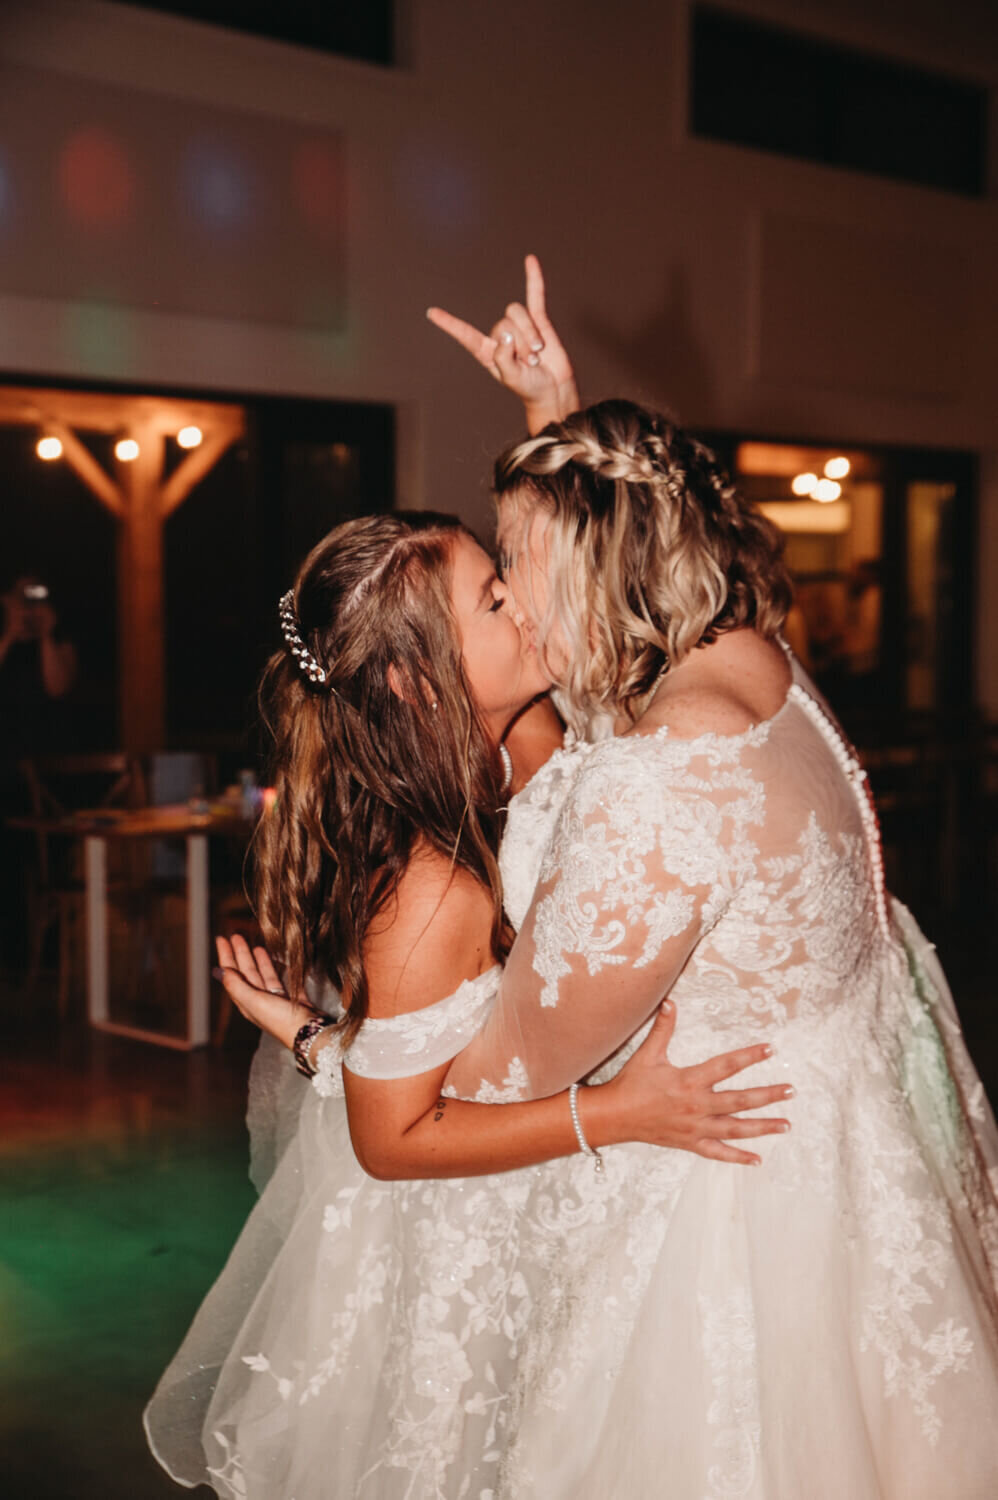 Brides kiss and show Rock On hand symbol as the night ends for their LGBTQ wedding